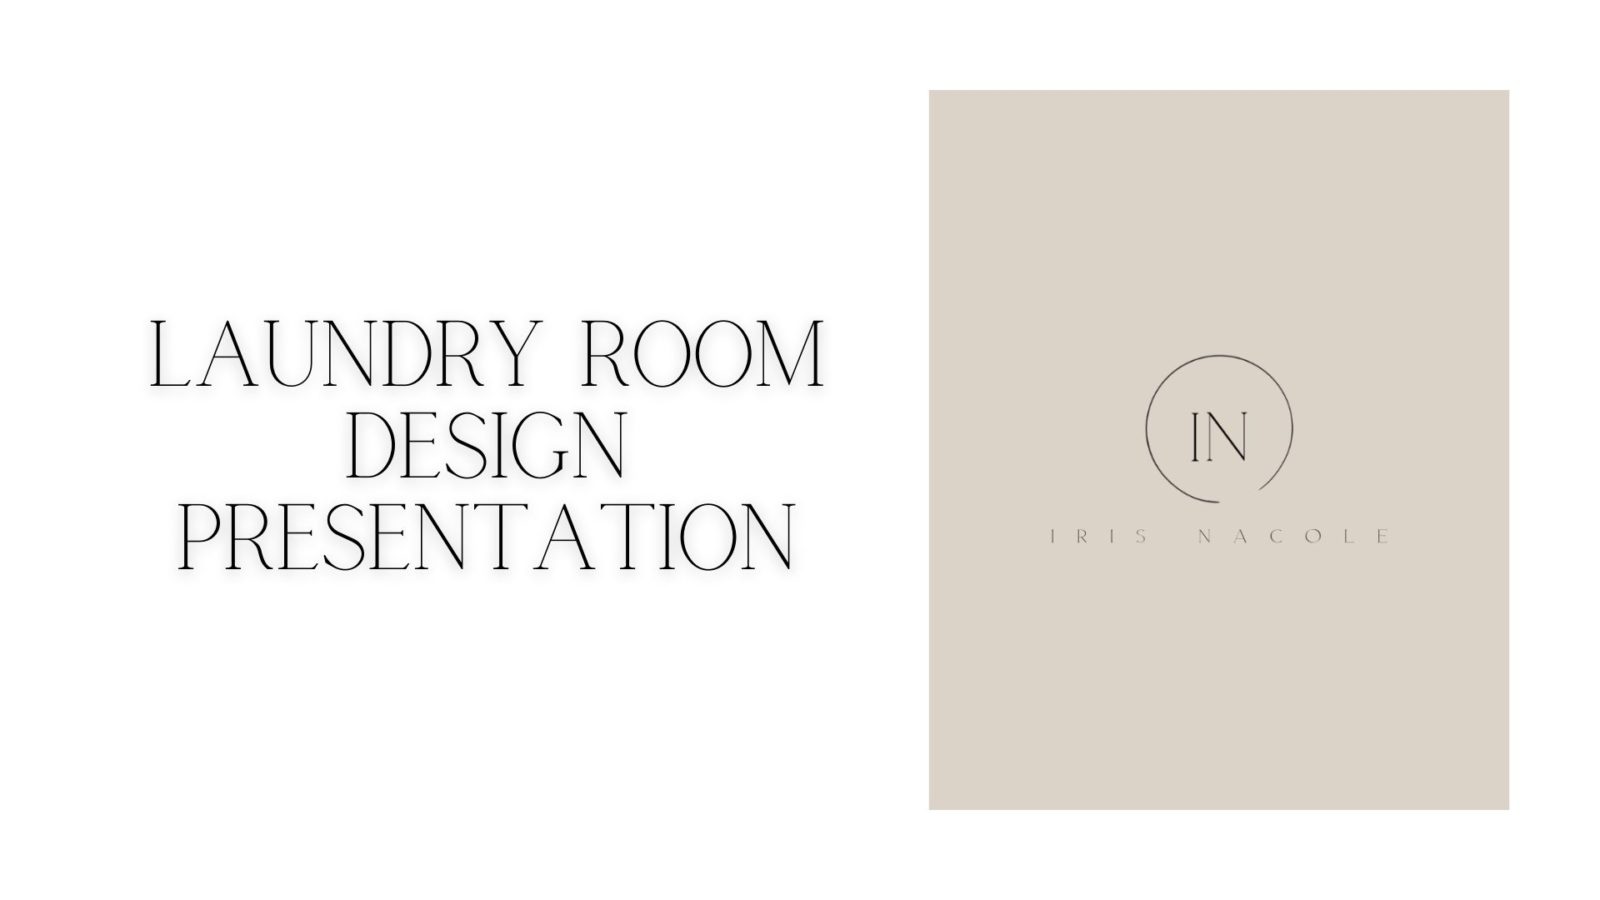 Page 1 of Laundry Room Design Presentation by Iris Nacole